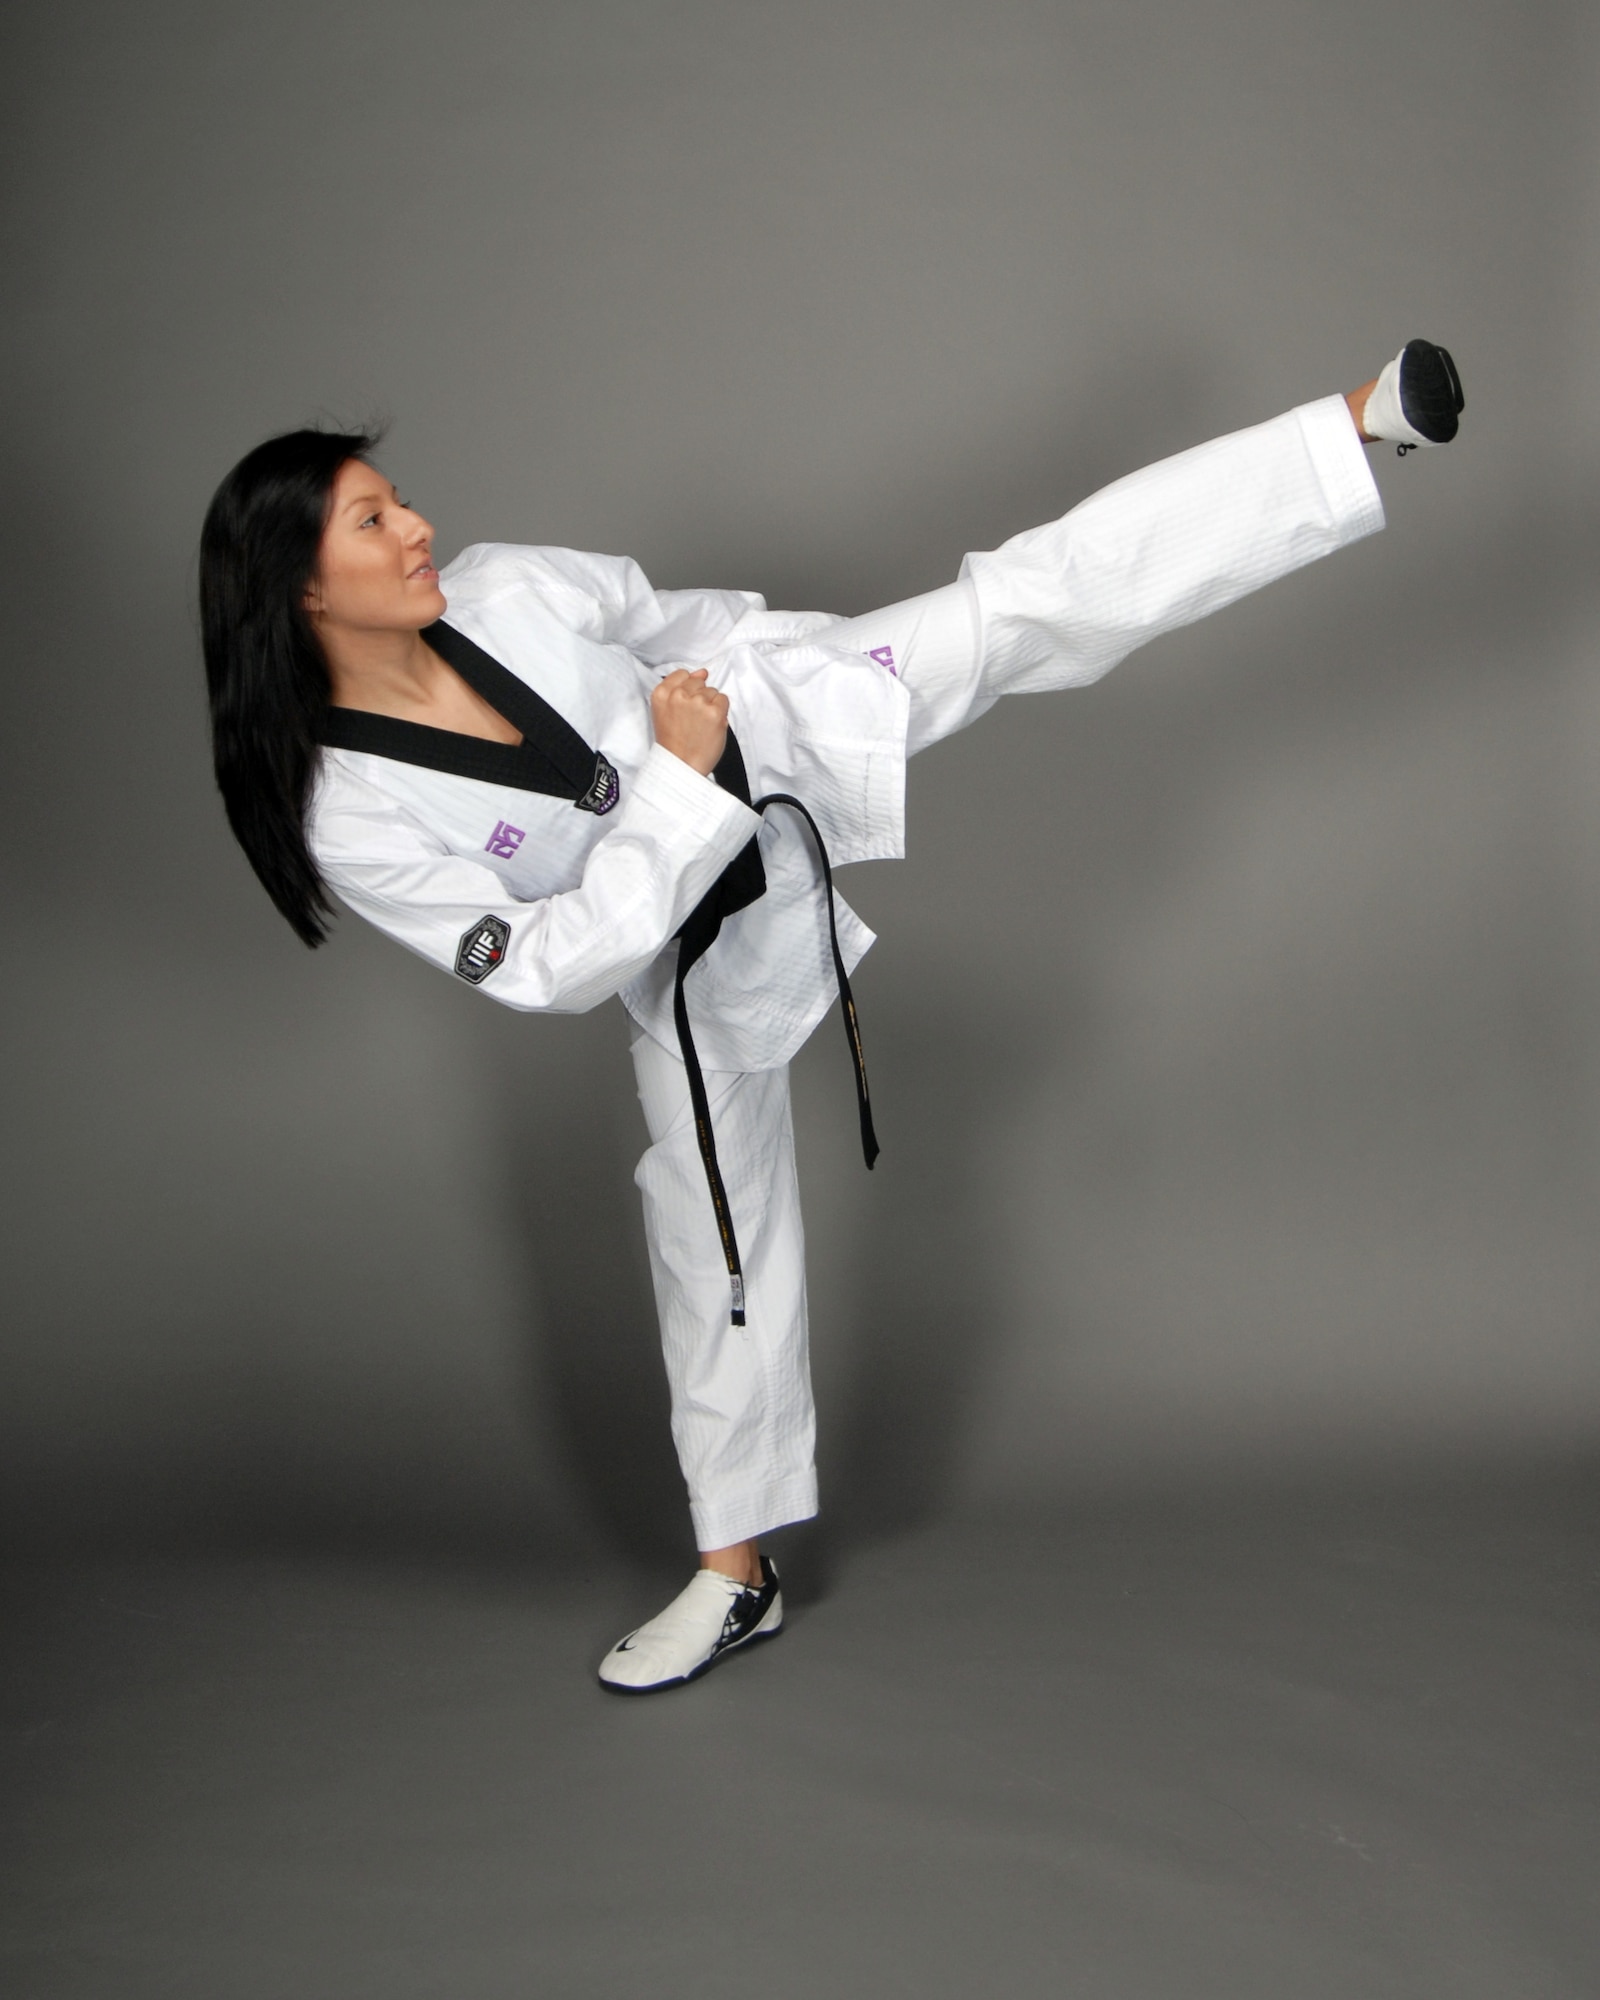 Family Member Jessie Bates demonstrates her Taekwondo skills. The 16-year old has been selected to represent the U.S. in Singapore at the Youth Olympics. The games will be held in August. (Photo by Jim Gordon)